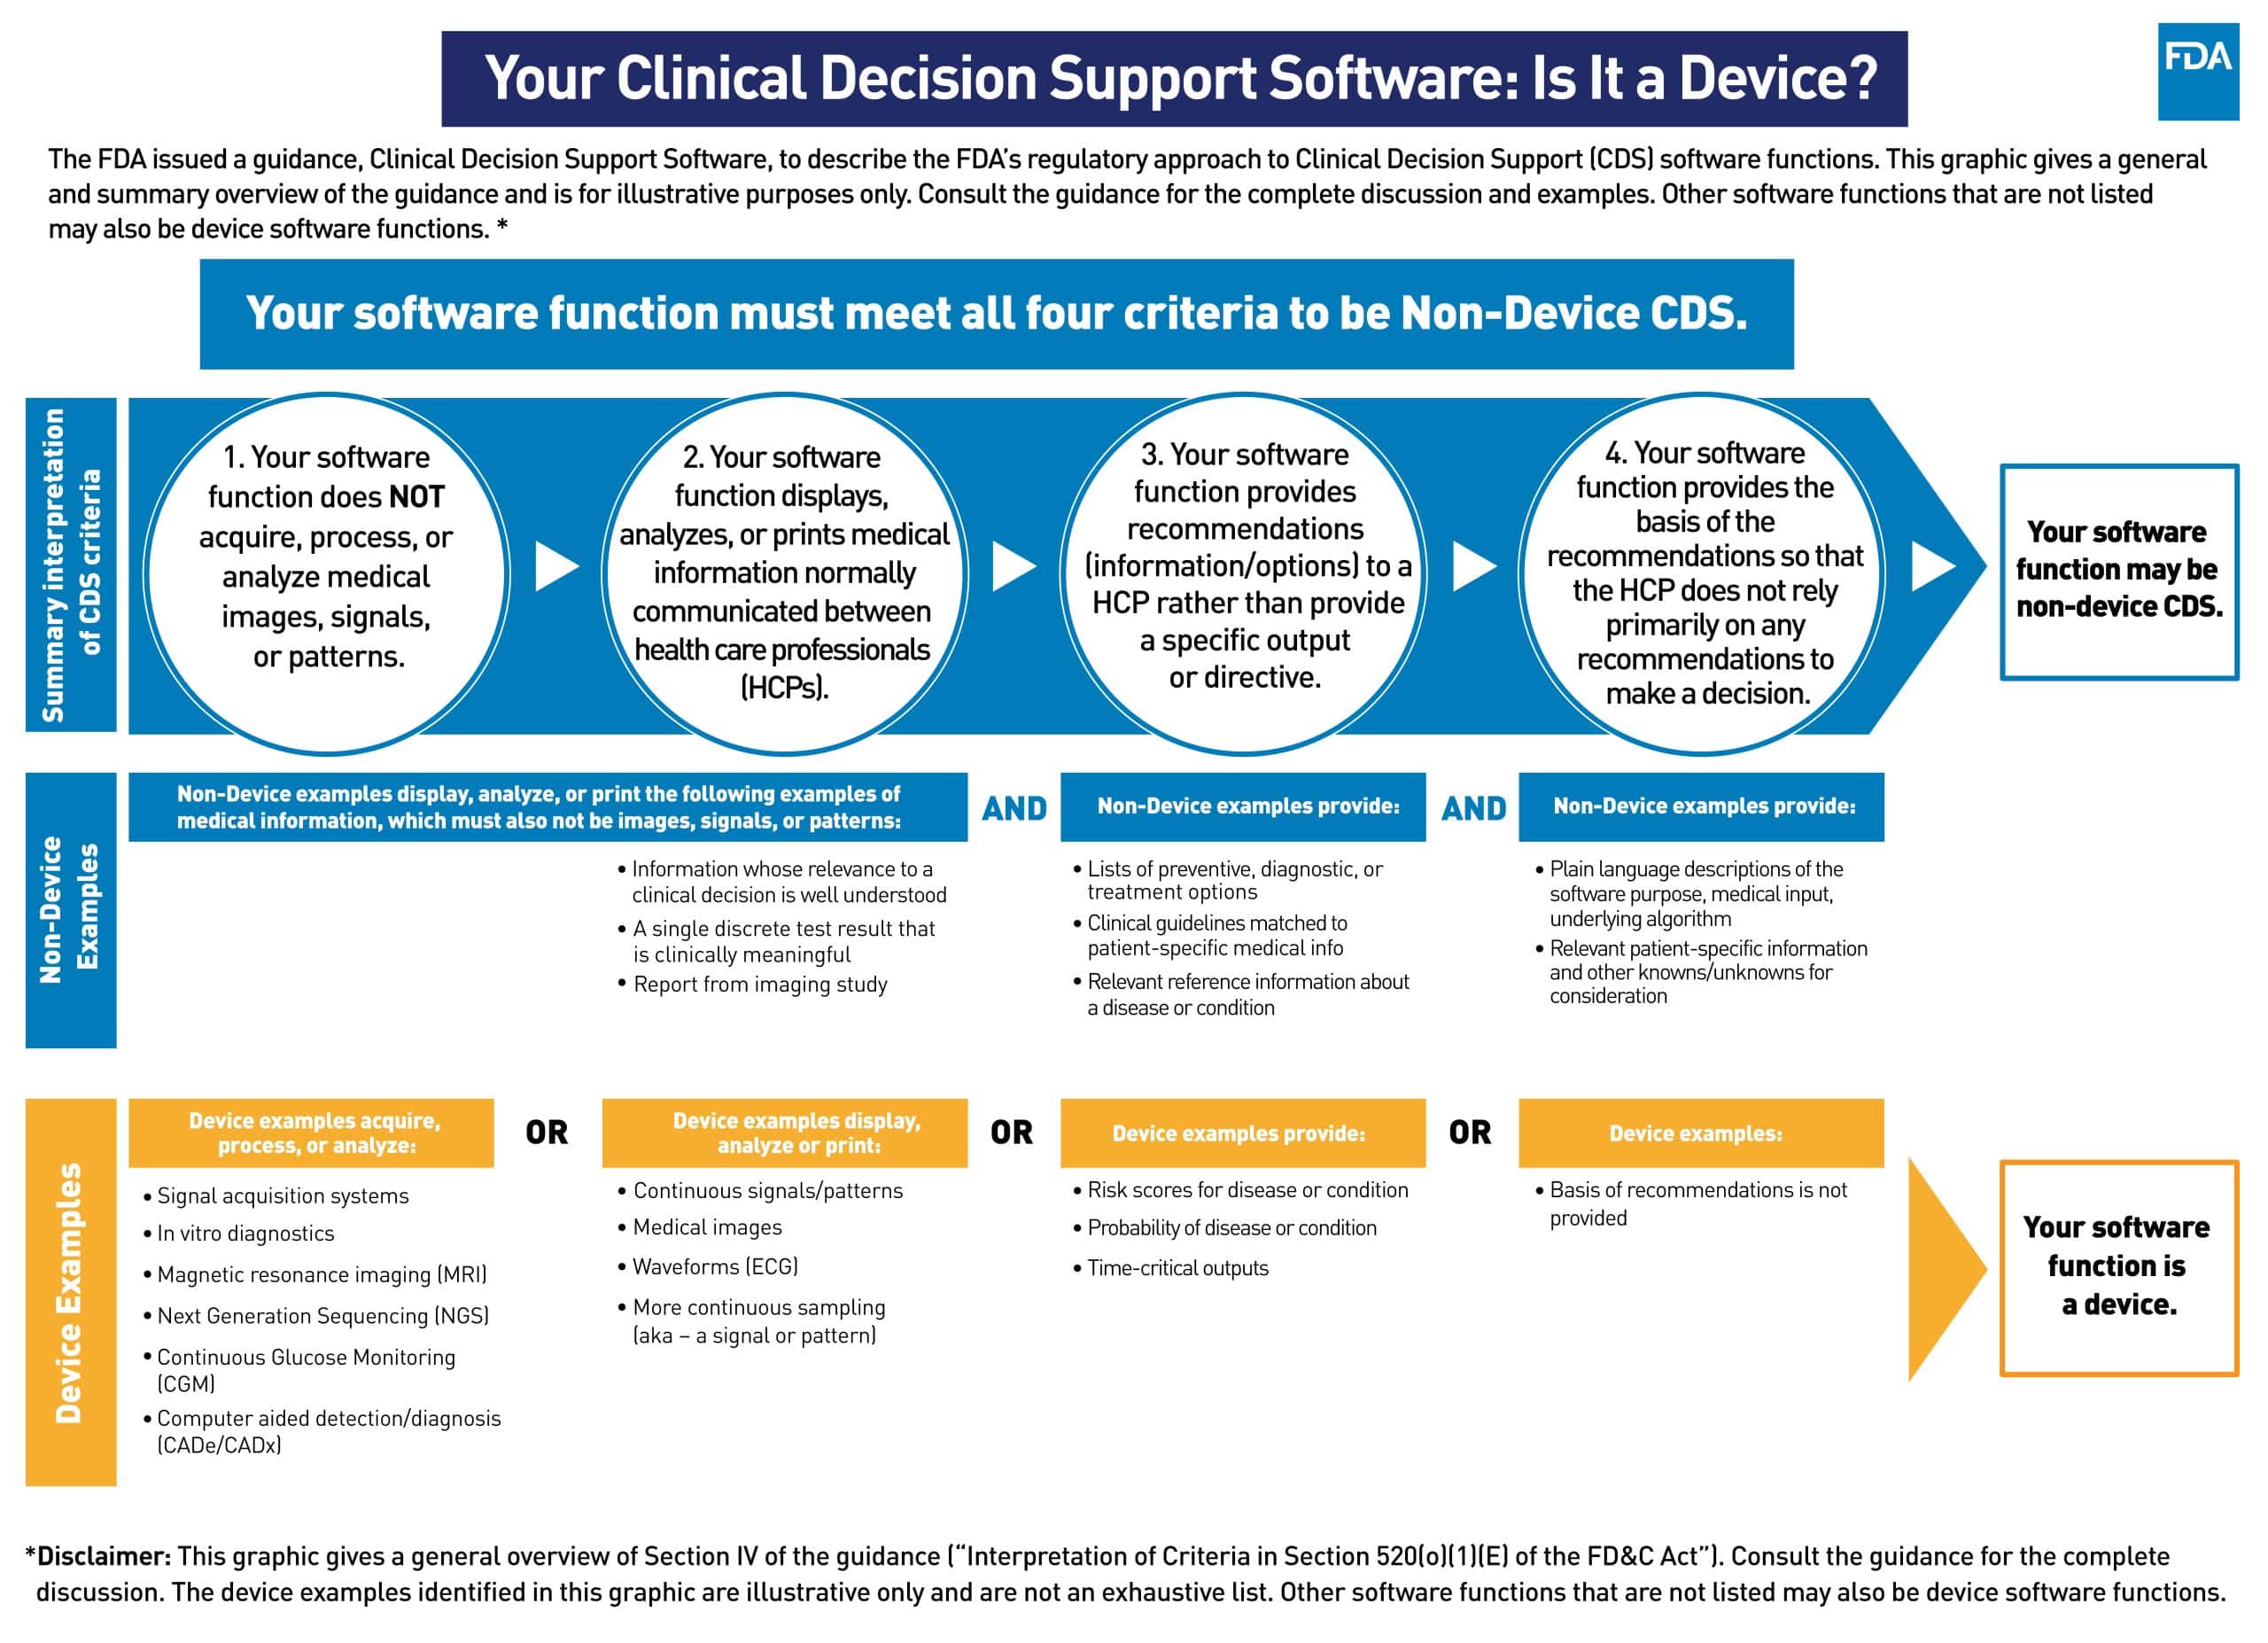 2022 FDA update - CDS Software or Medical Device?